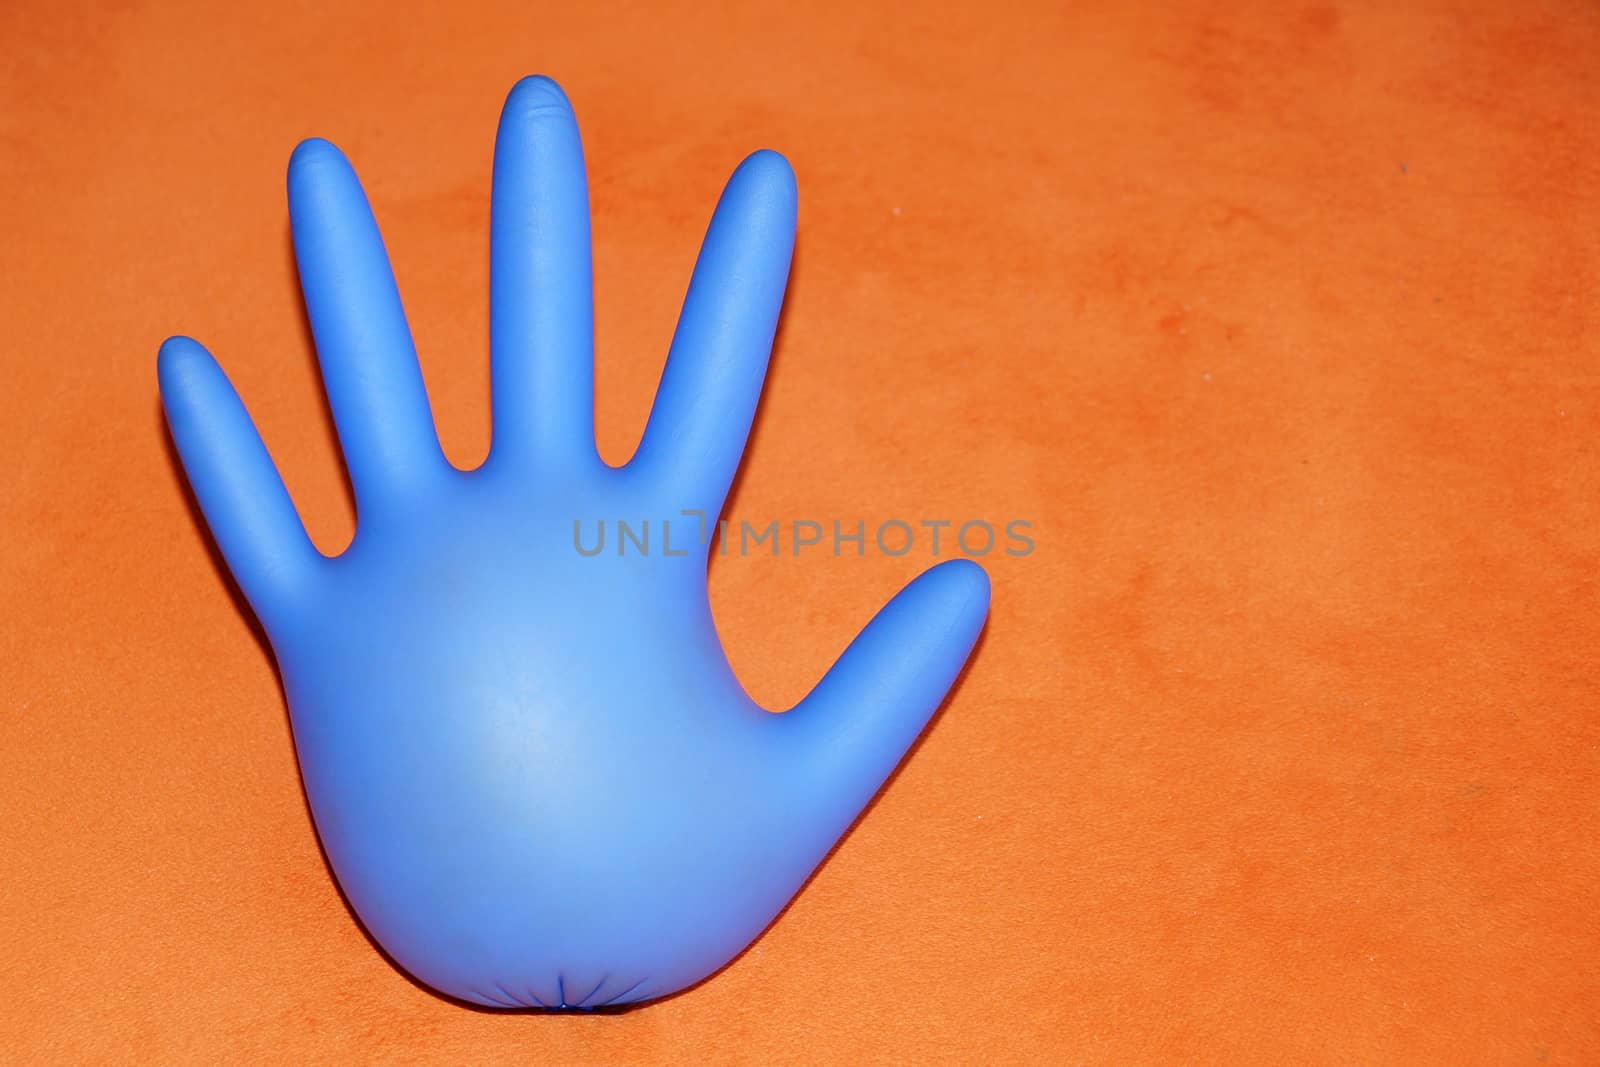 inflated rubber medical glove on orange background, copy space.